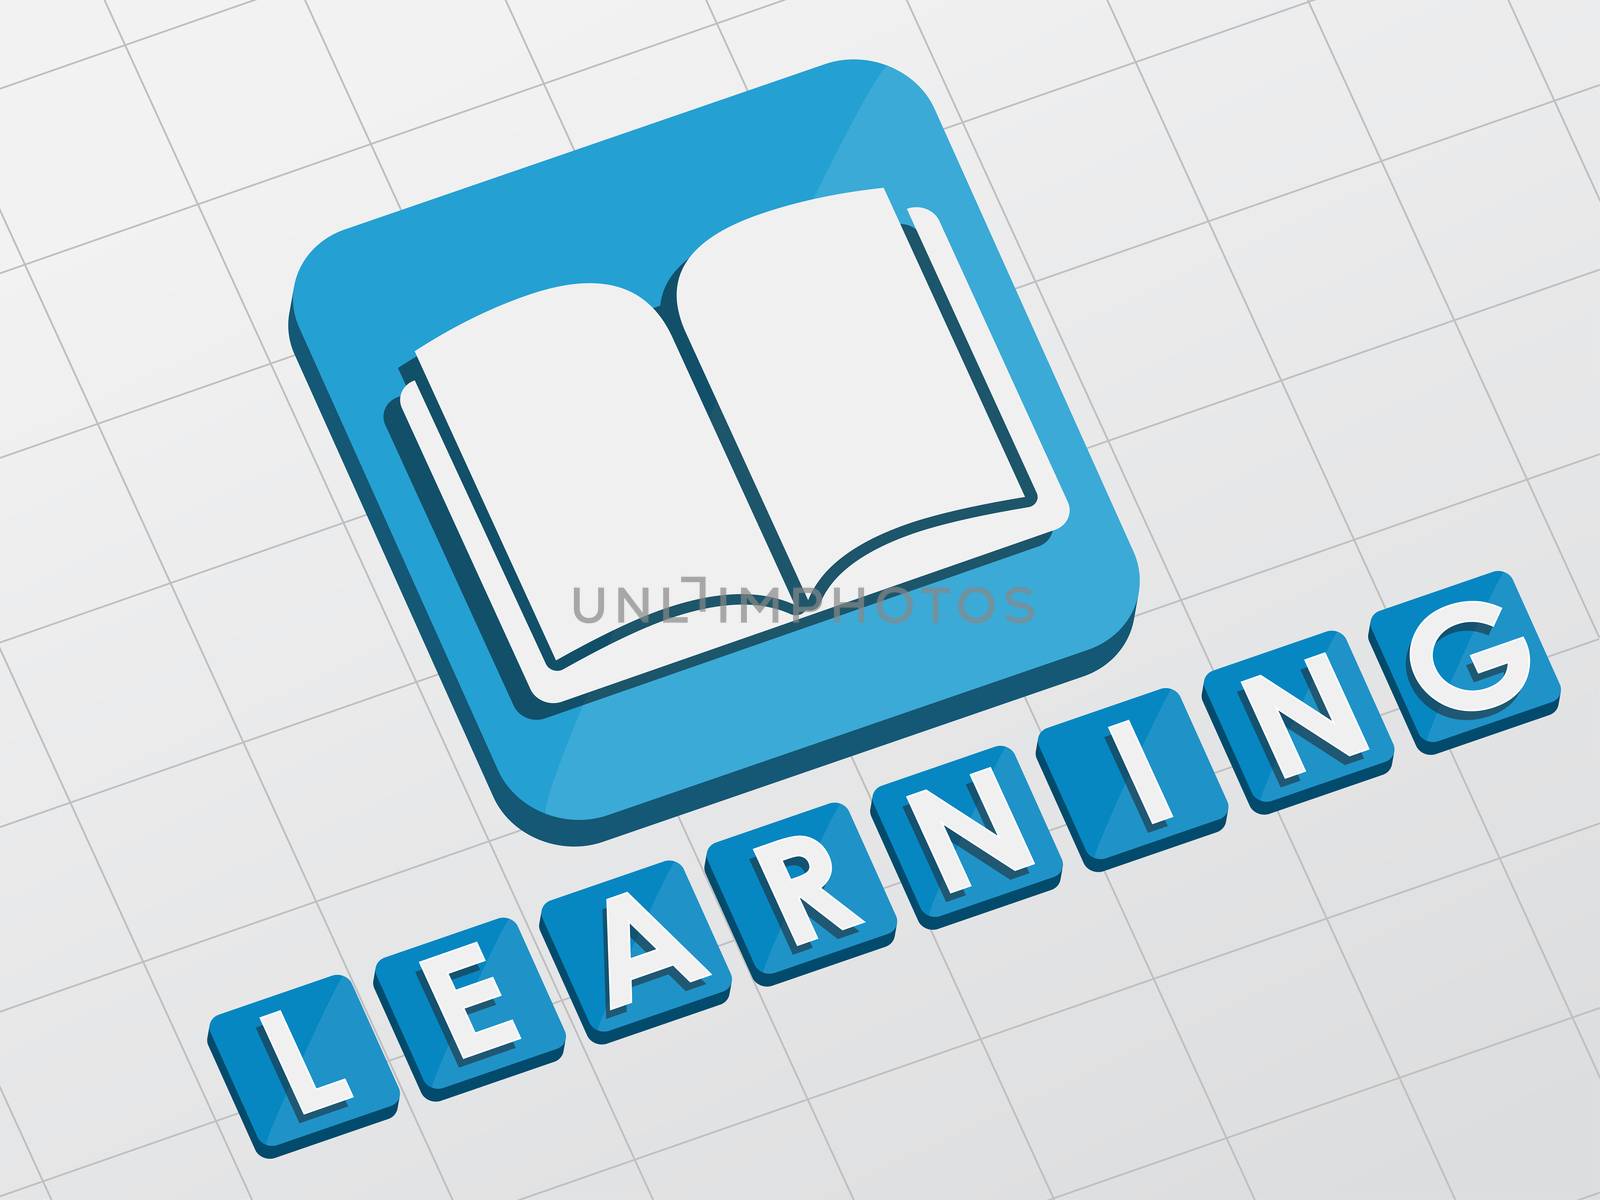 learning and book sign - white text with symbol in blue flat design blocks, education concept